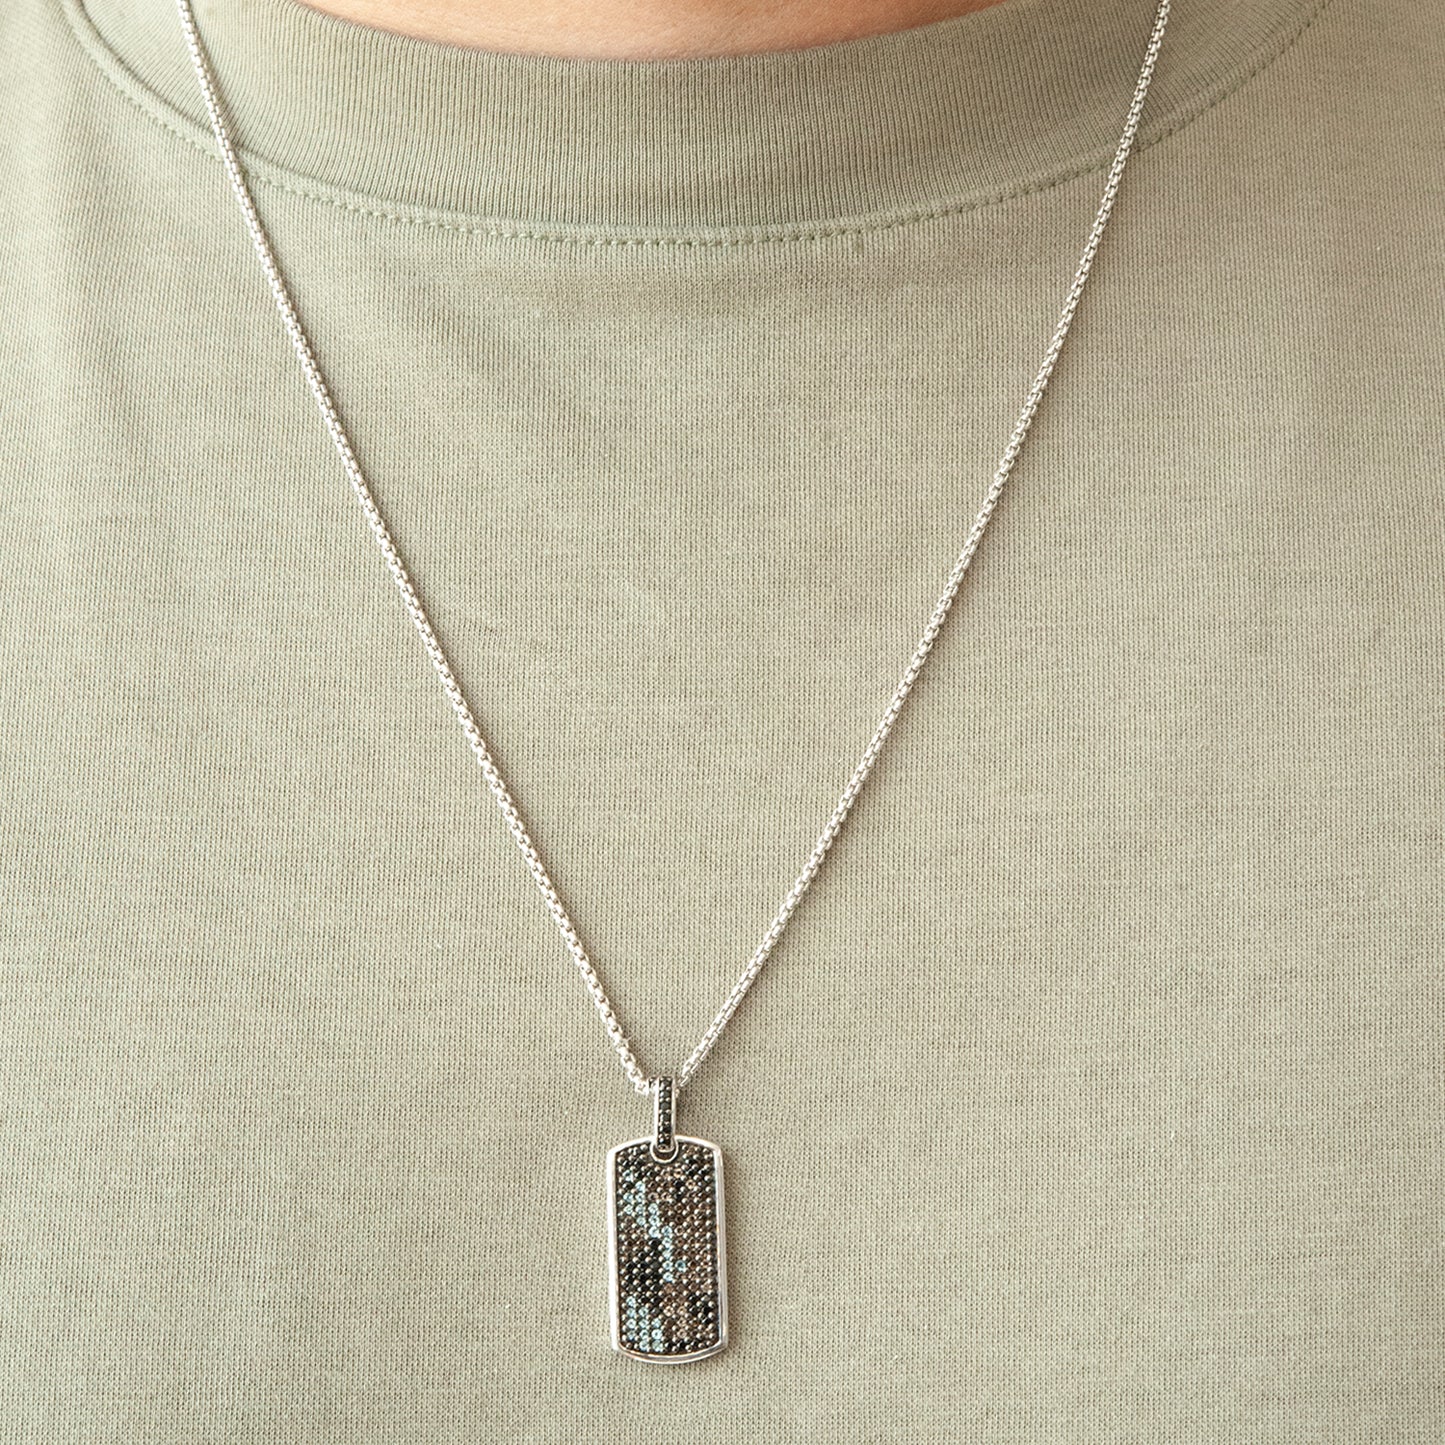 Silver Chain Camo Dog Tag Pendant on T-shirt